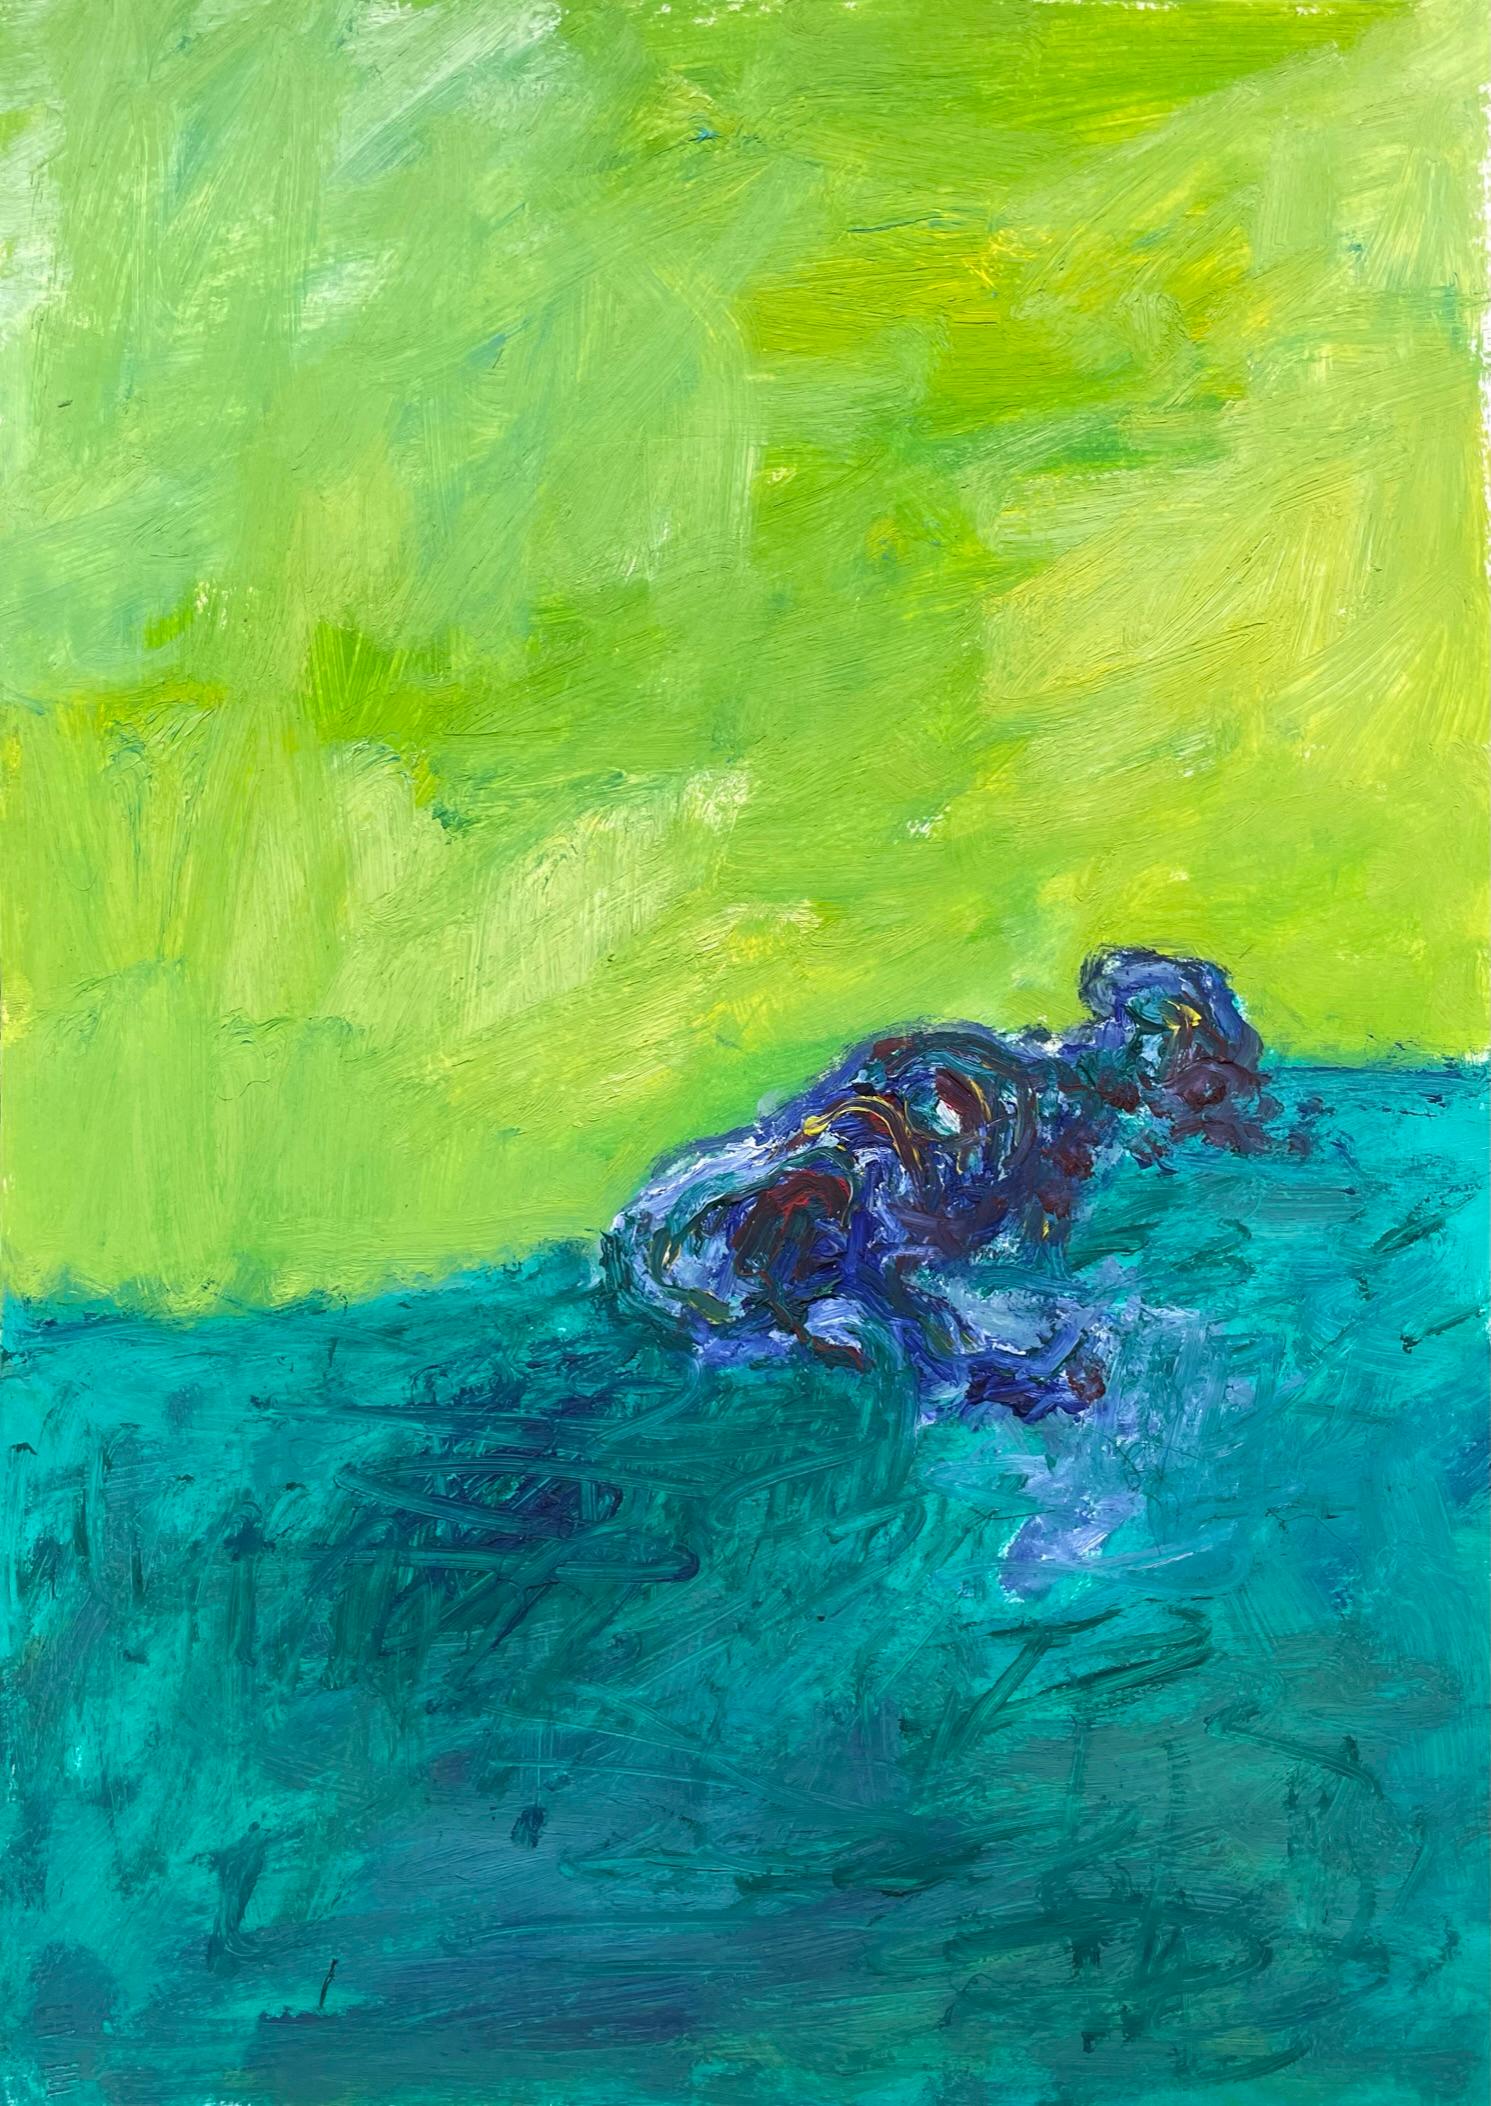 Remains (Body in the Field 13) - 21st Century, Green, Blue, Oil